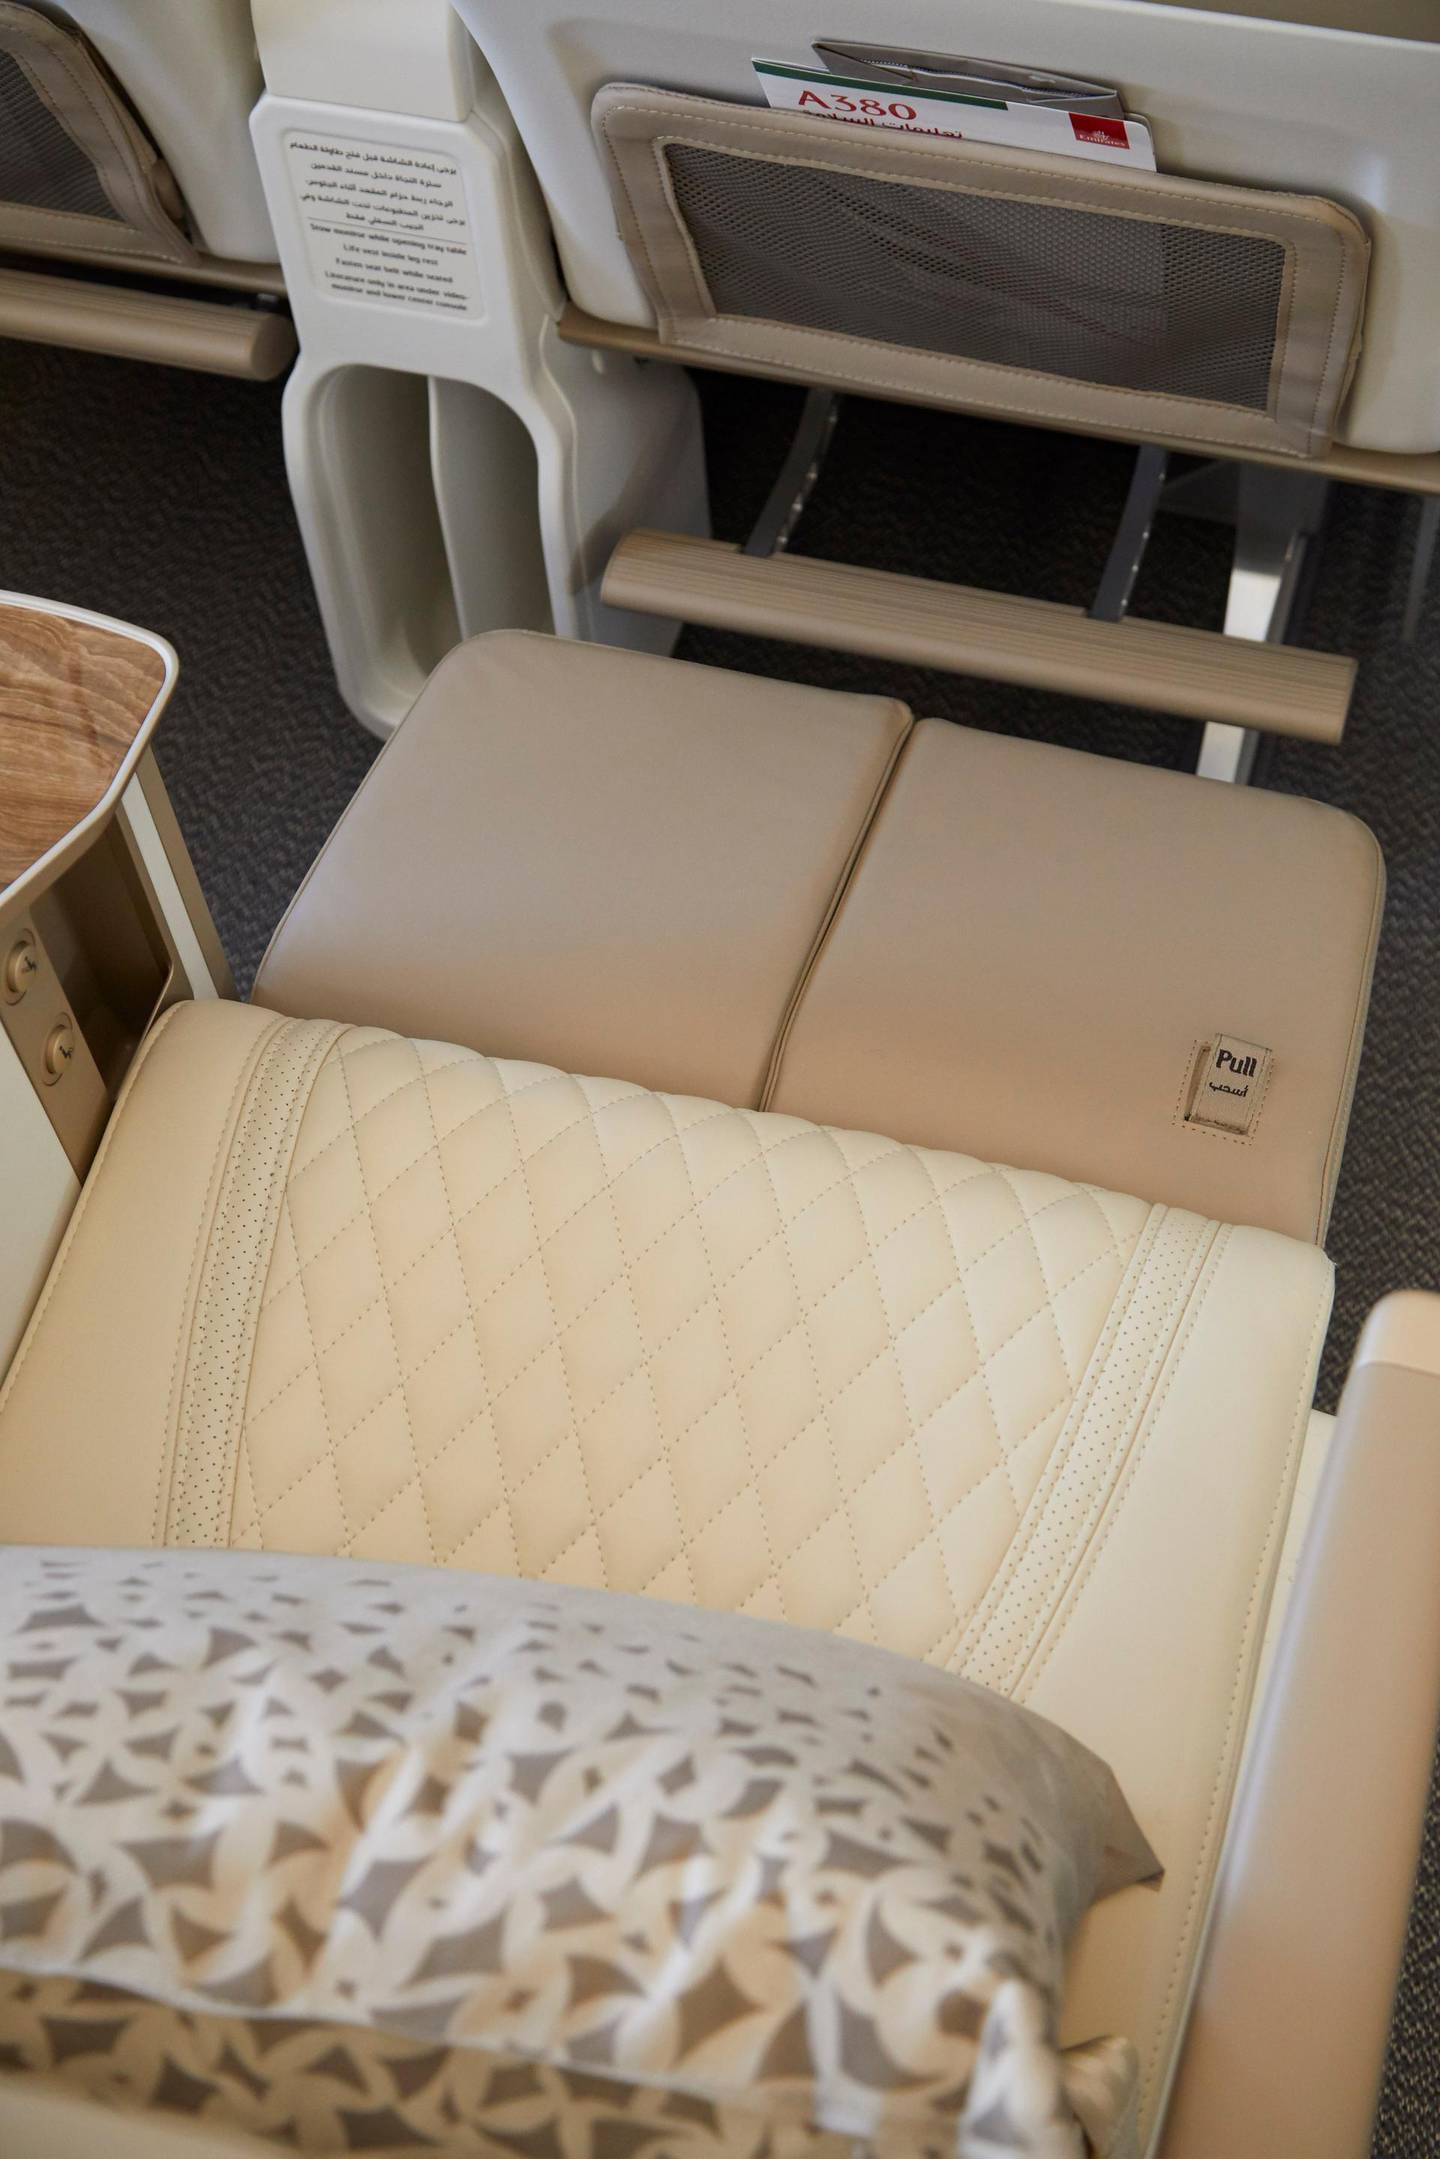 Premium Economy seats have a generous recline, but are not fully lie-flat. Courtesy Emirates